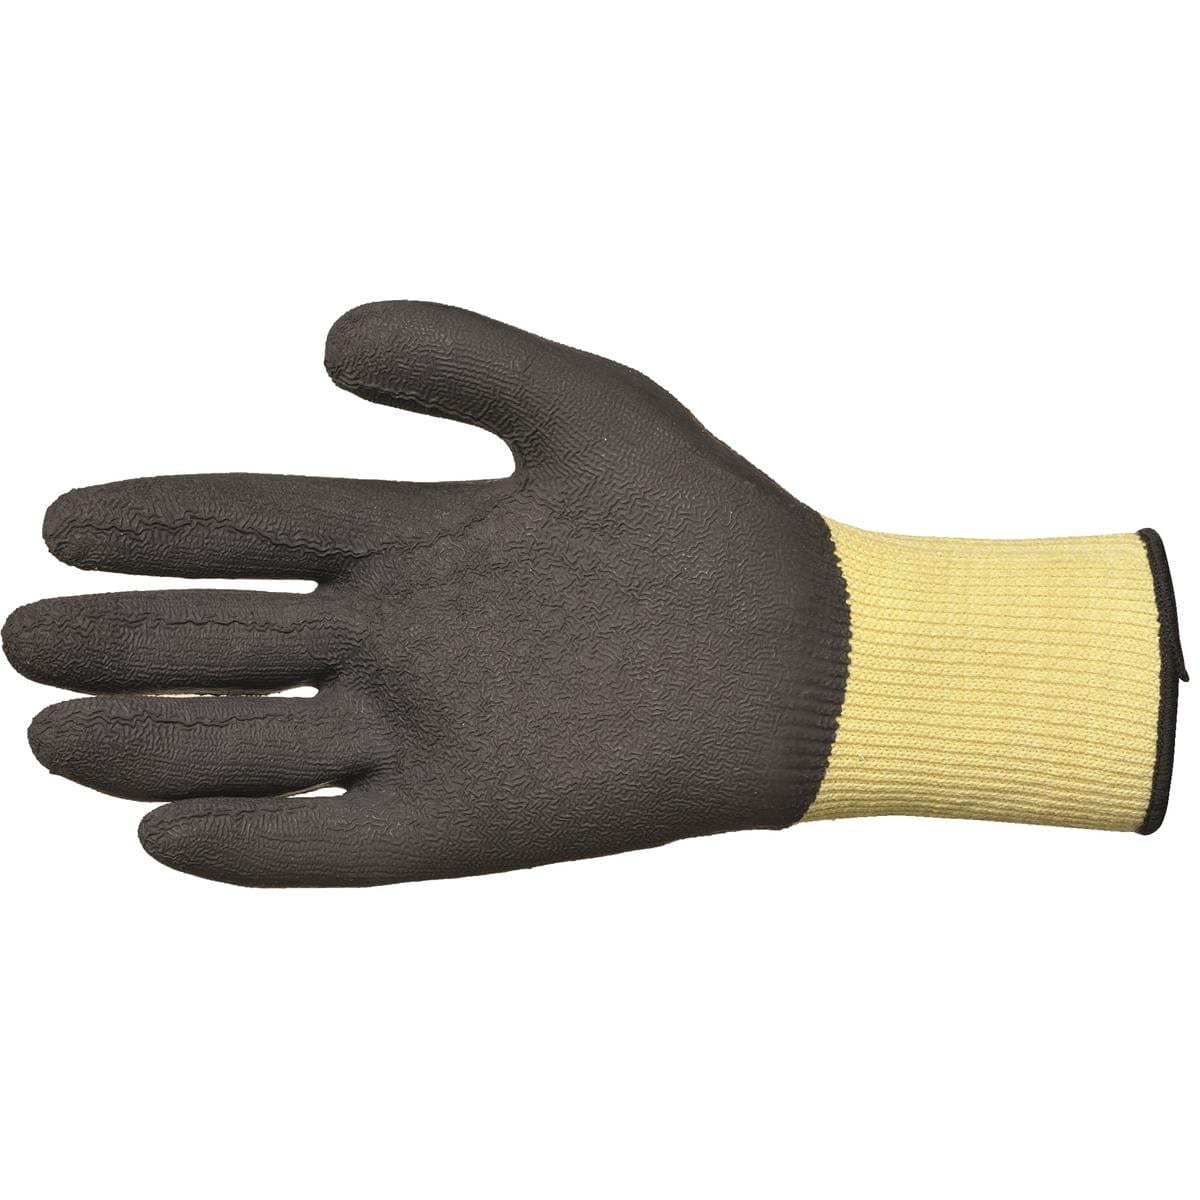 Showa-Best S-Tex Coated Rubber Palm Gloves